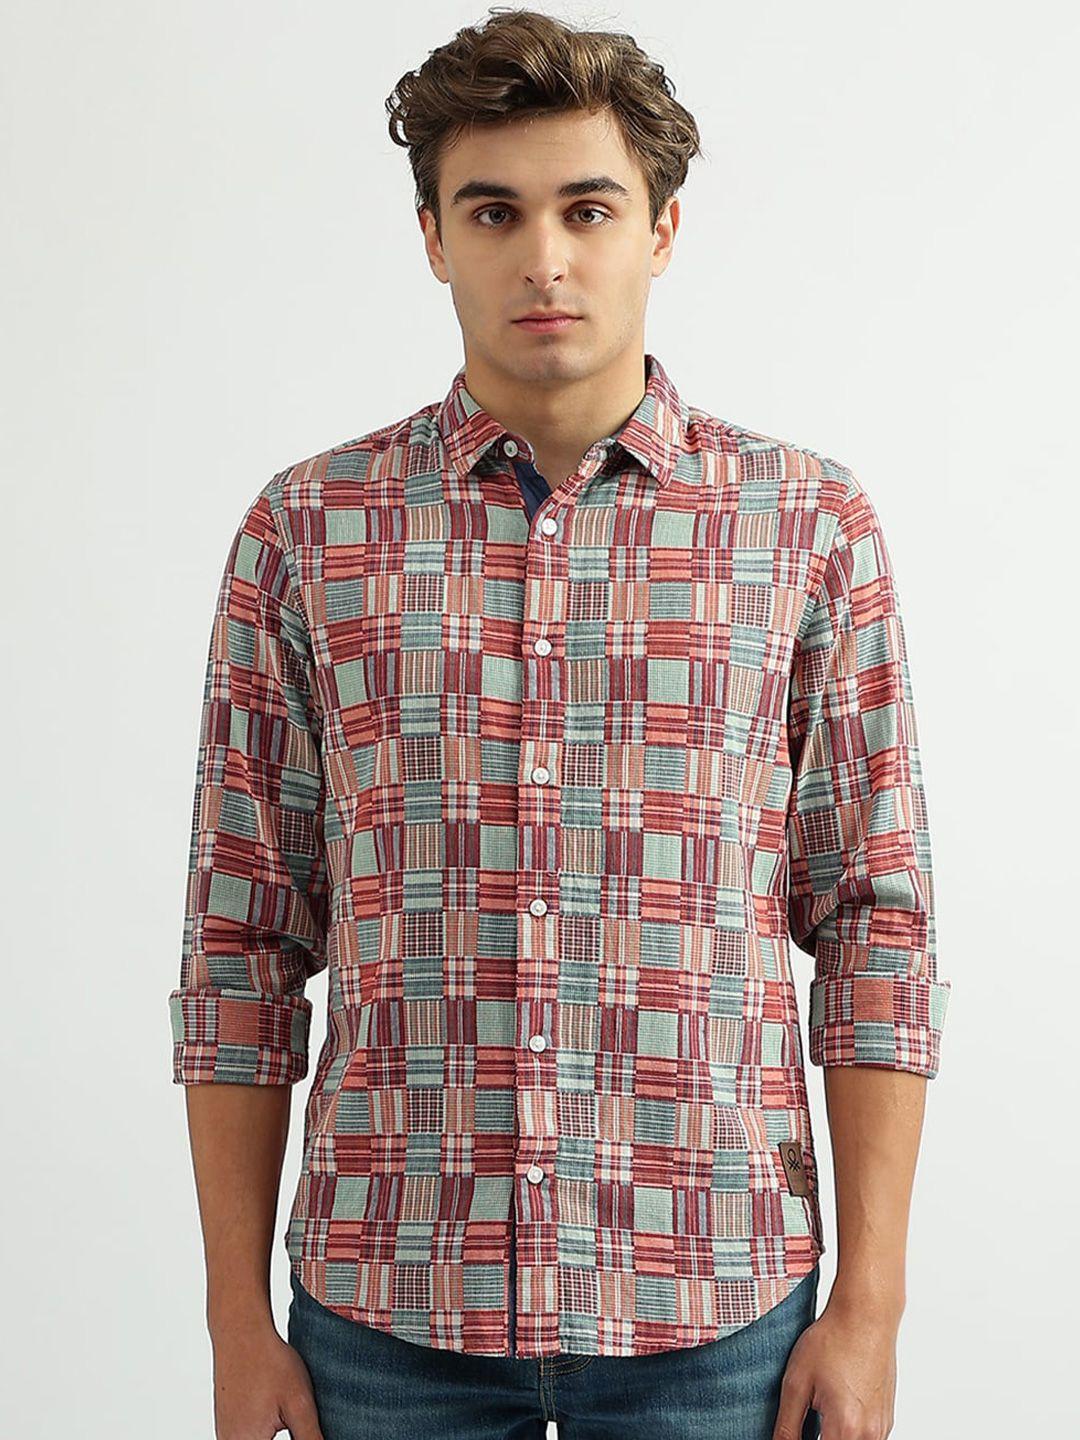 united-colors-of-benetton-men-cotton-checked-casual-shirt